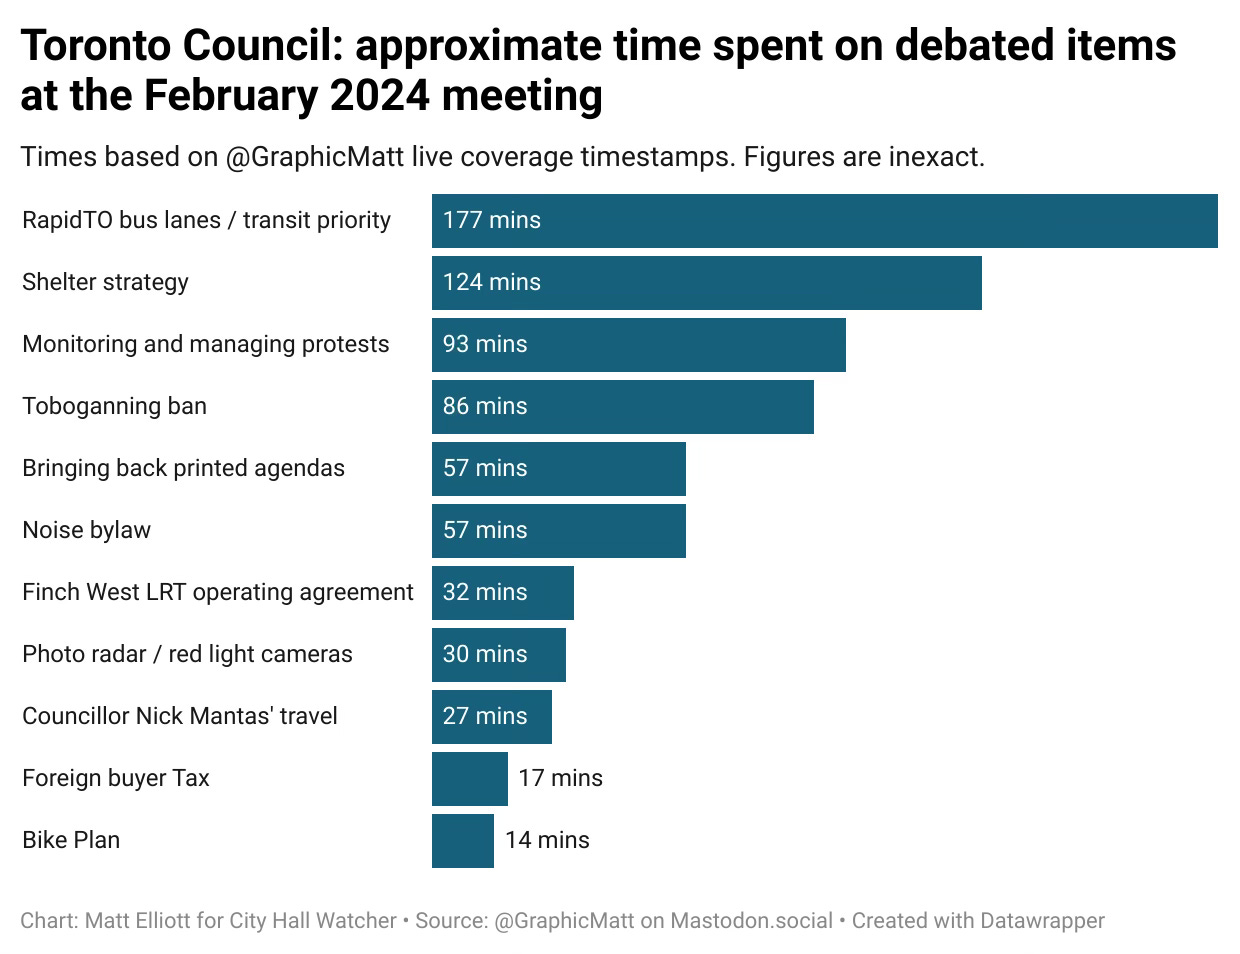 Bar graph of time, in minutes, spent debating major issues at the Feb 2024 Council meeting. Top three are RapidTO (177 minutes), Shelters (124 minutes) and monitoring protests (93 minutes)